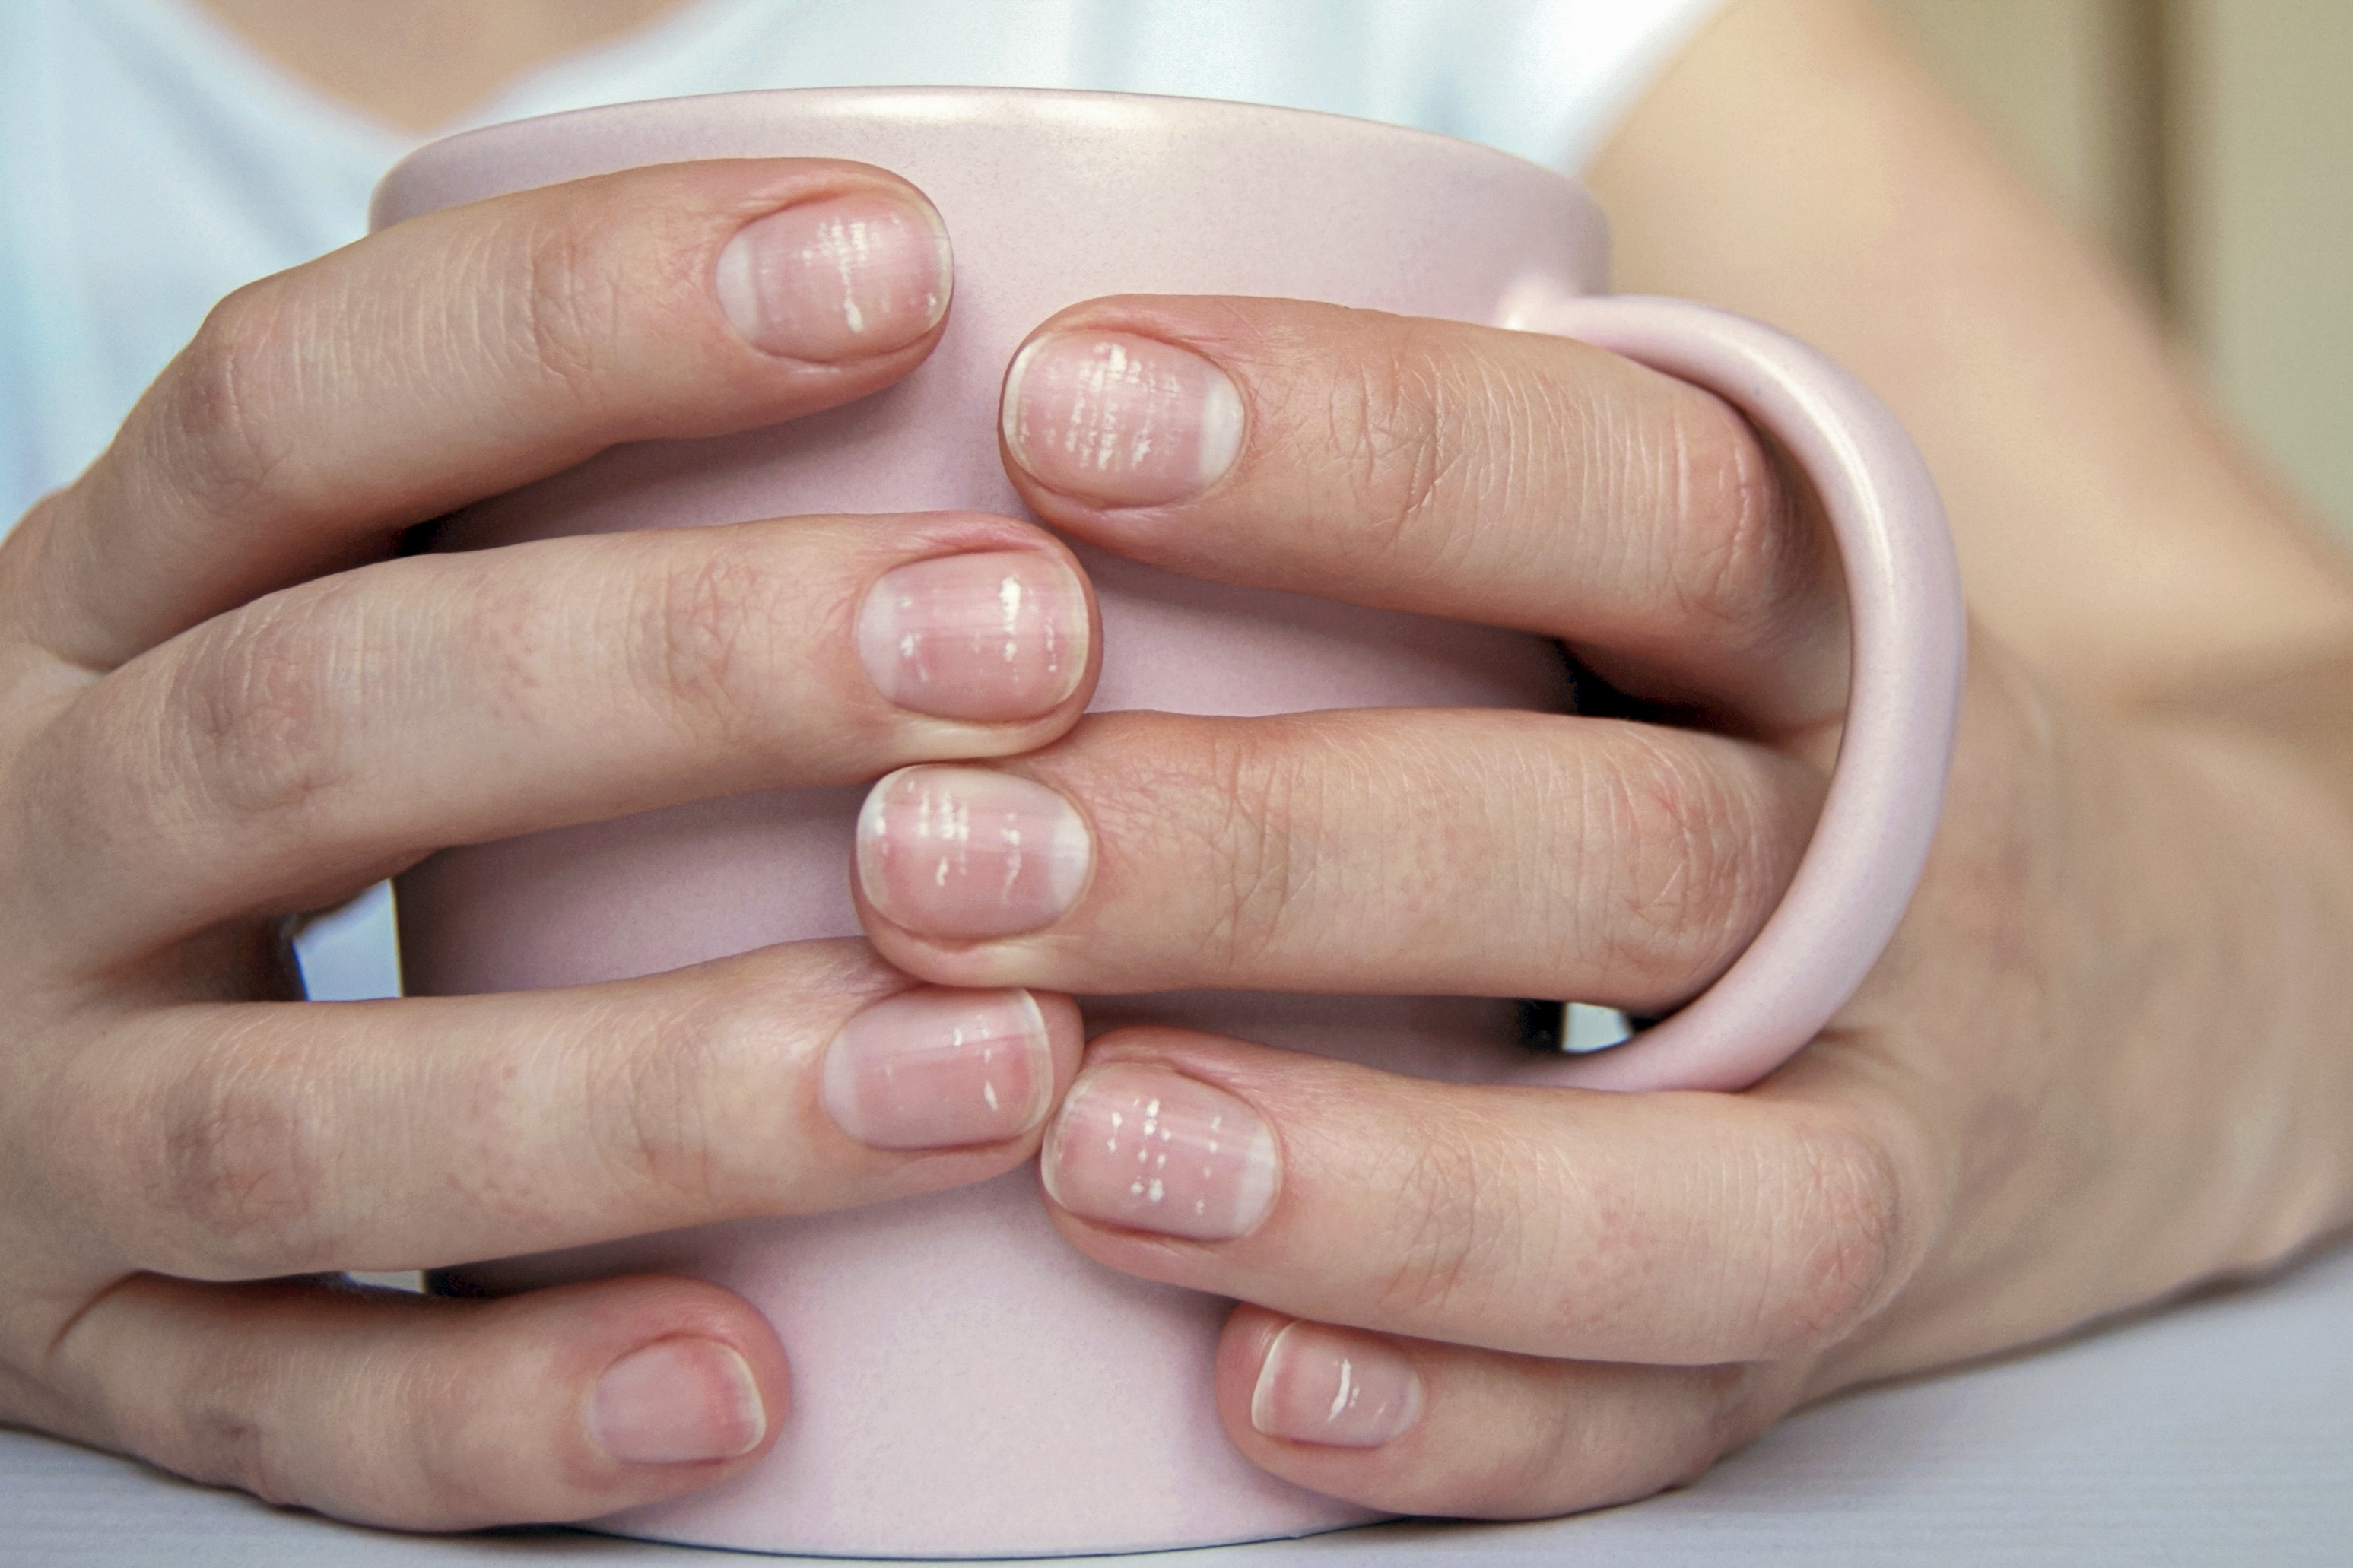 Causes and Signs of Vitamin Deficiency in Fingernails | livestrong